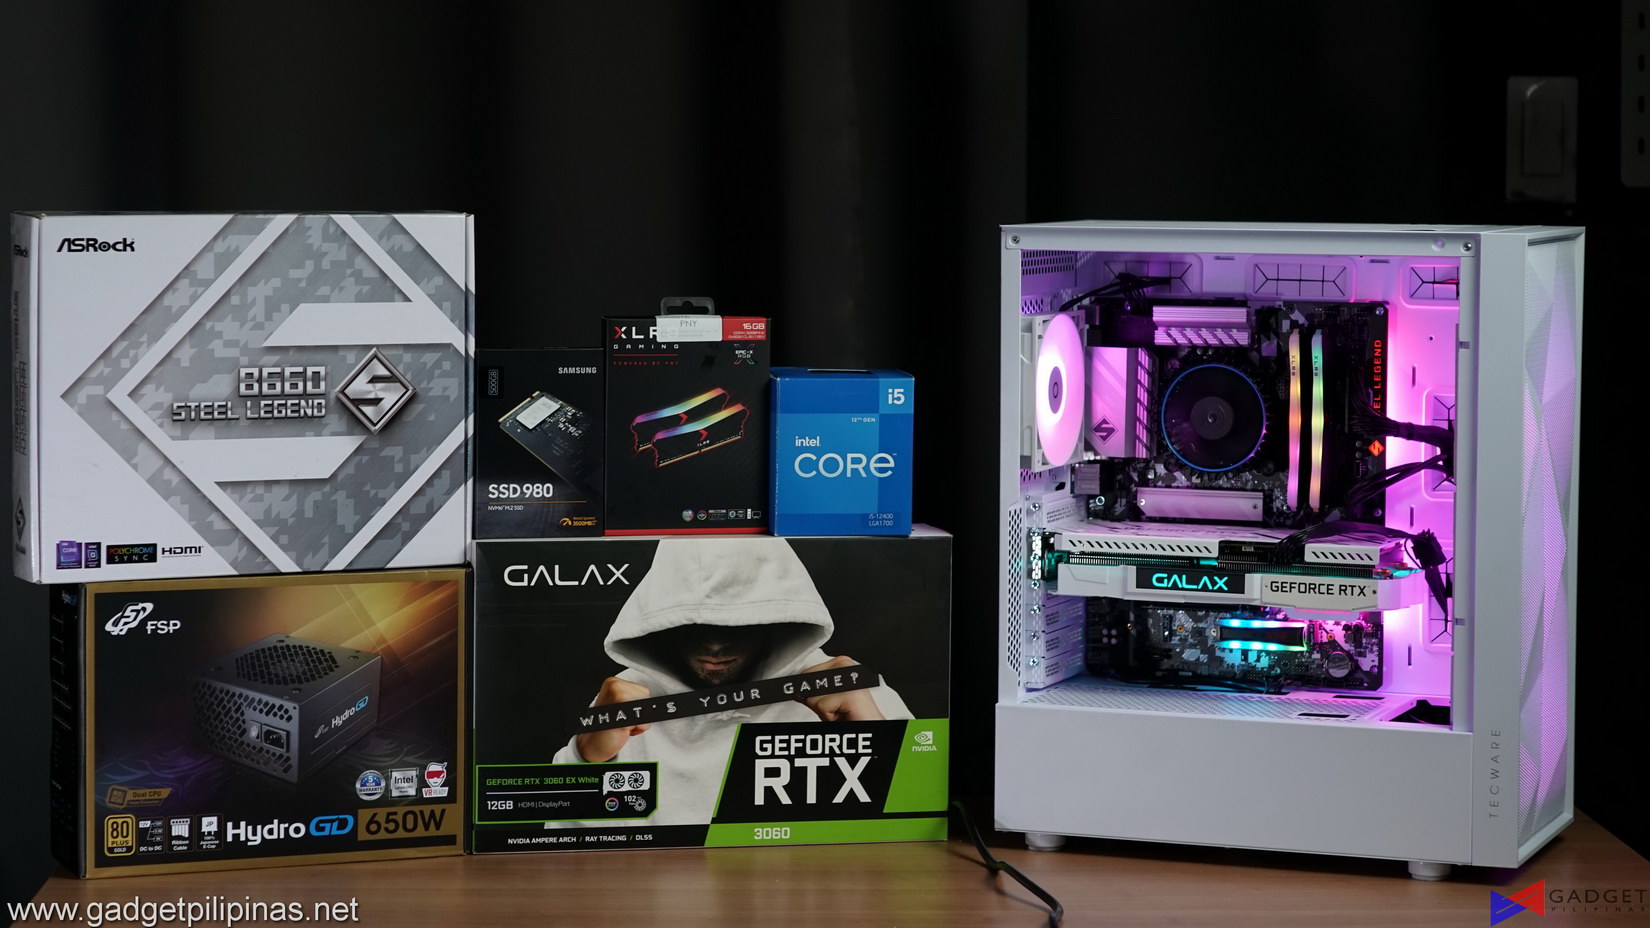 Php 50K Gaming Pc Build Guide (Q1 2023) With Benchmarks - Core I5 12400 +  Rtx 3060 - Gadget Pilipinas | Tech News, Reviews, Benchmarks And Build  Guides